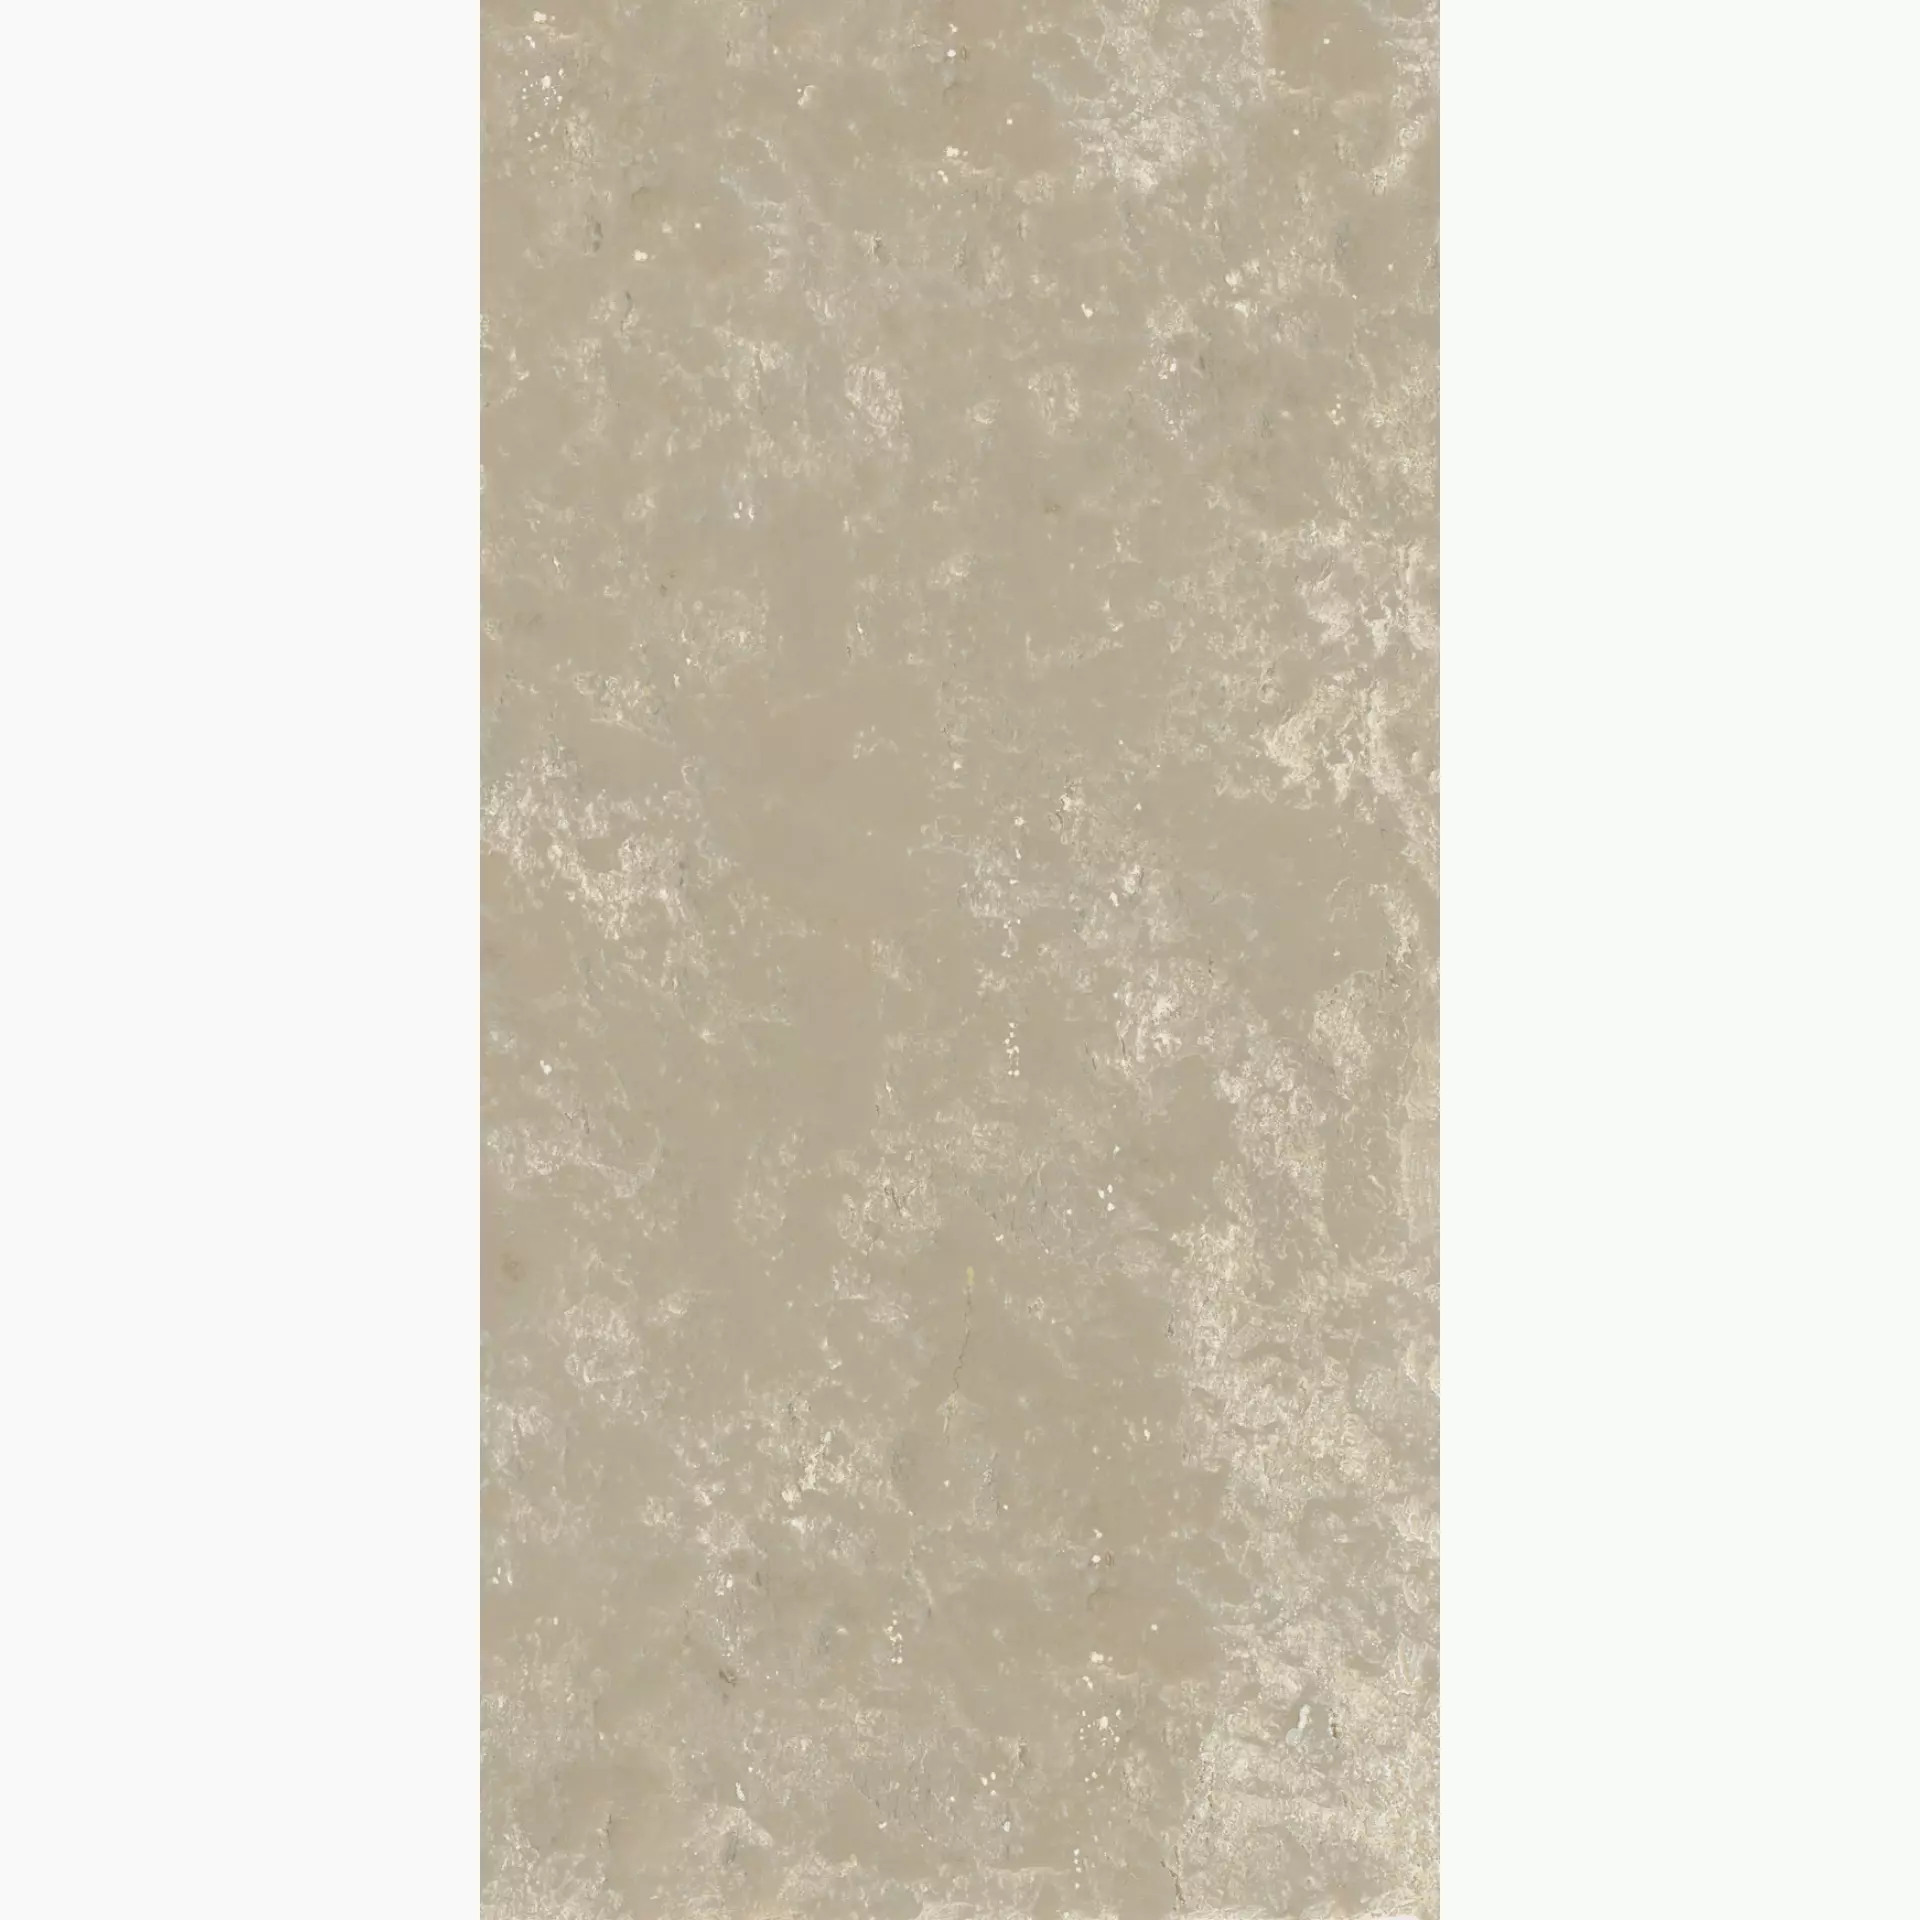 Keope Extreme Beige Strutturato 424E5931 45x90cm rectified 20mm